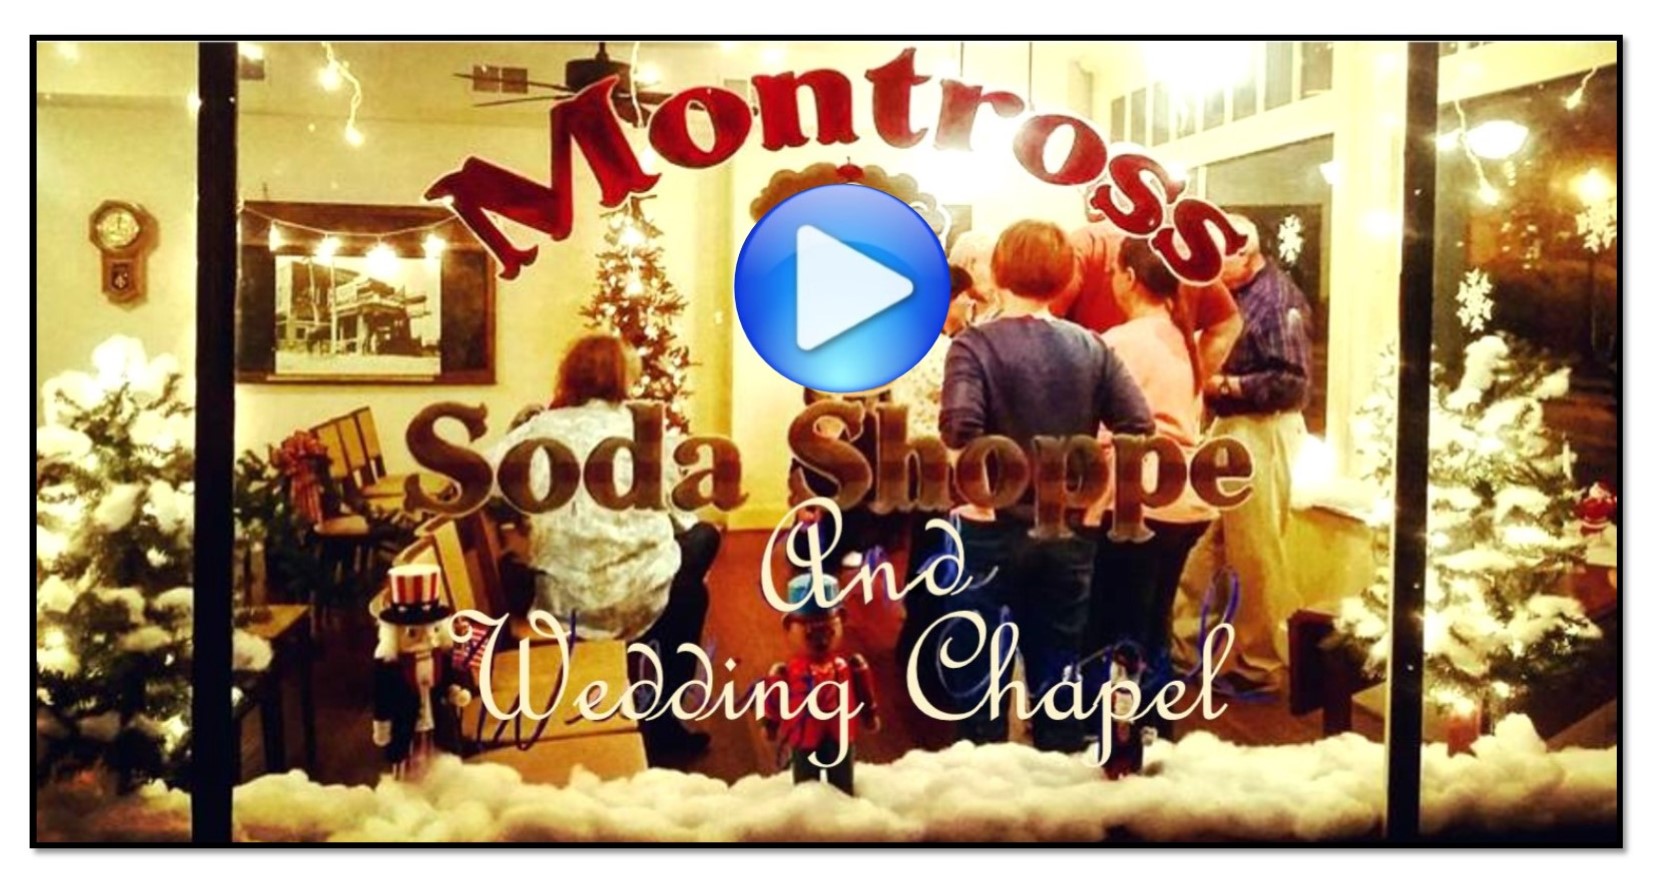 Get Married in our General Store and Soda Shoppe